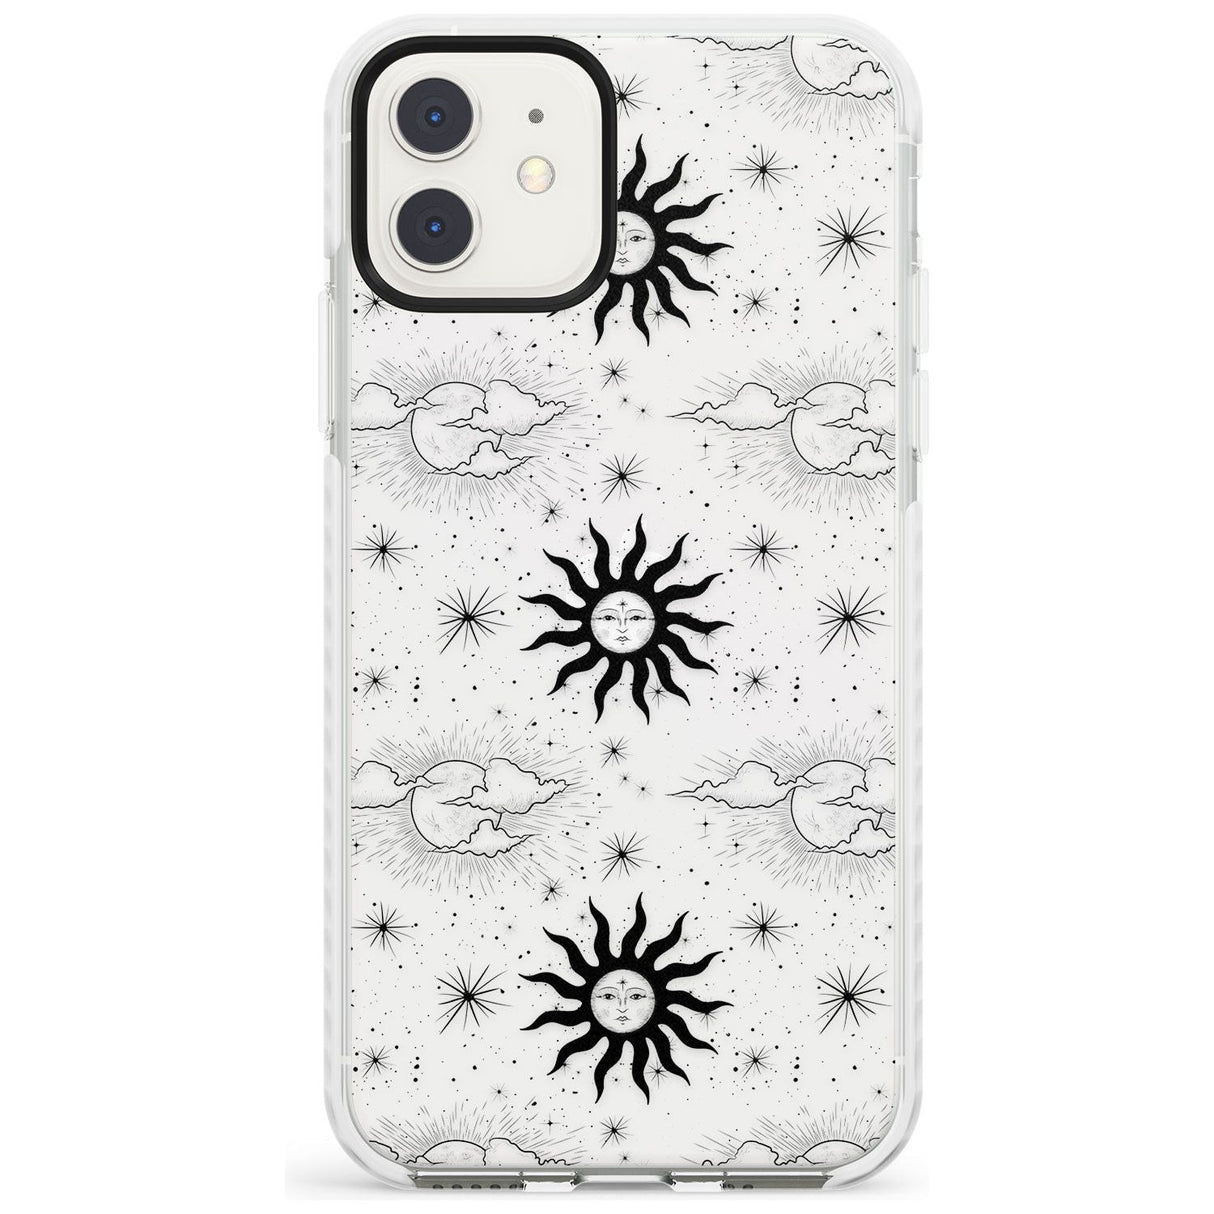 Suns & Clouds Vintage Astrological Impact Phone Case for iPhone 11